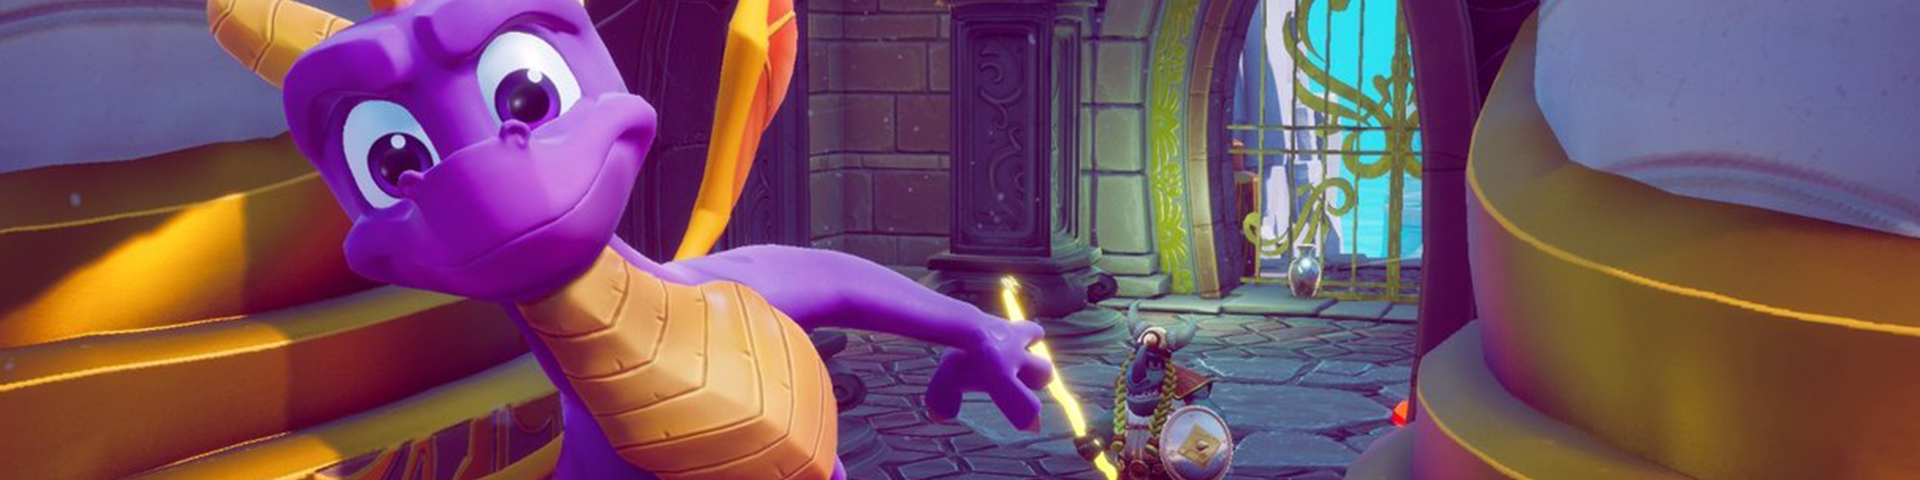 ilt forvridning tilbagebetaling Spyro Reignited Trilogy' Trailer Sure To Bring Pure Joy To Fans — Explosion  Network | Independent Australian Reviews, News, Podcasts, Opinions